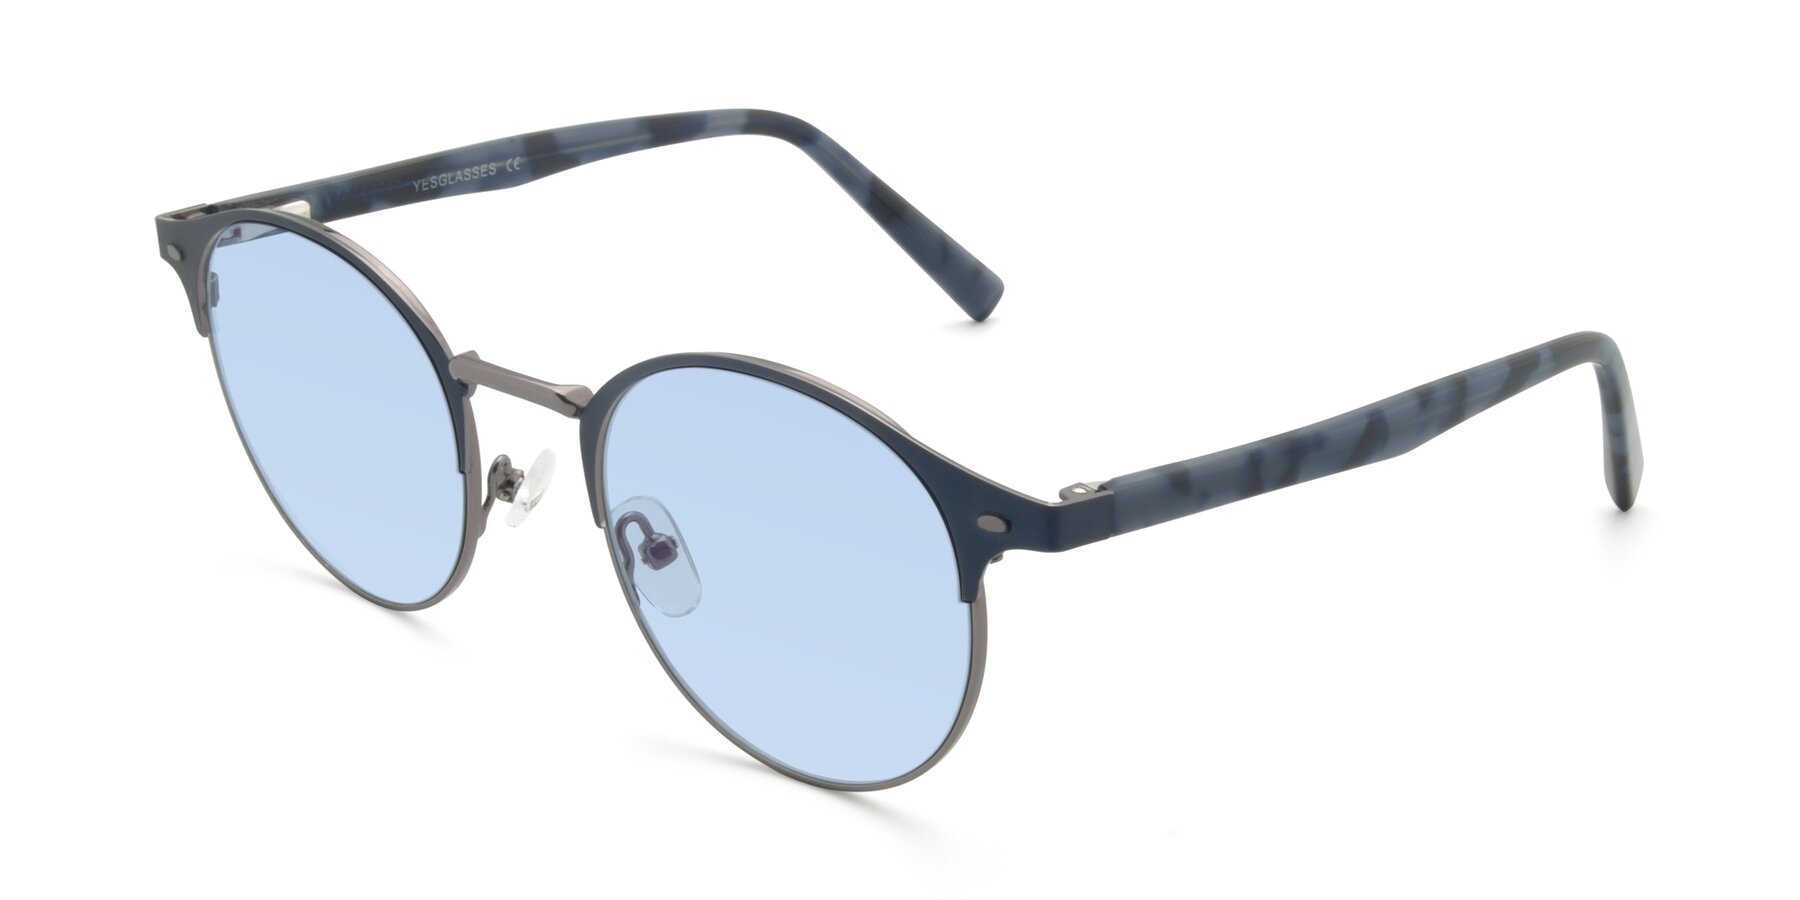 Angle of 9099 in Blue-Gunmetal with Light Blue Tinted Lenses